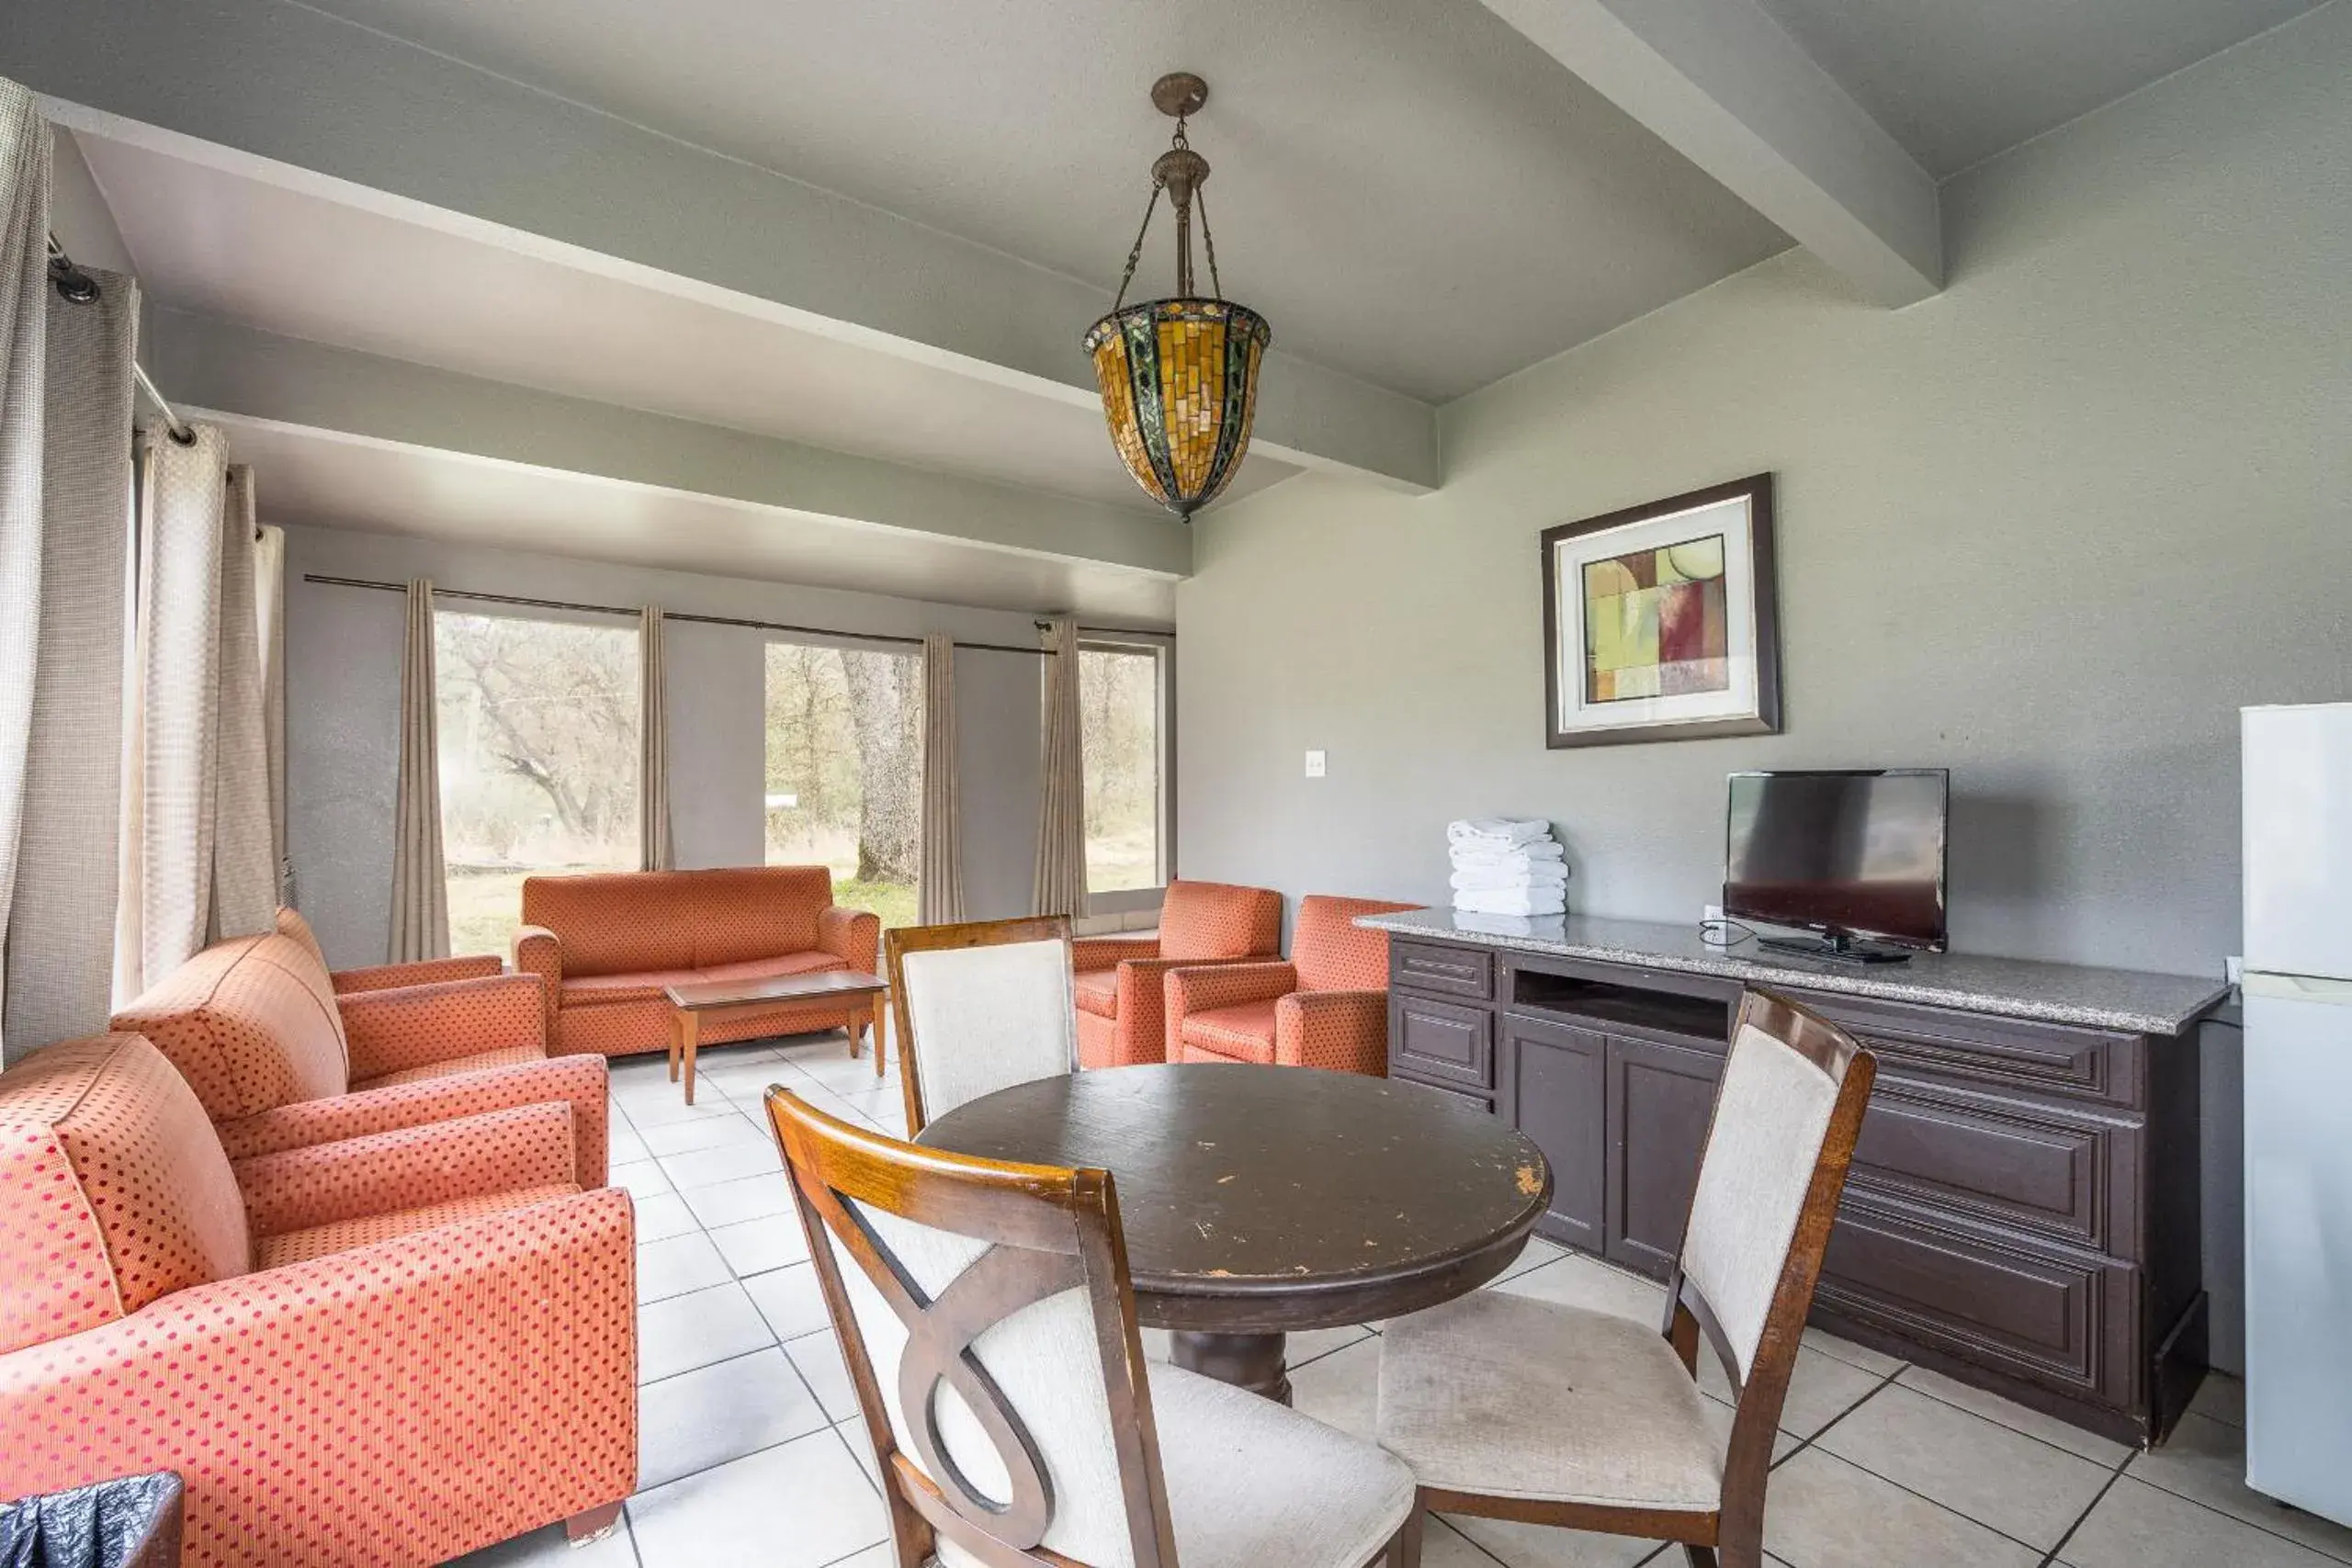 Seating Area in Mountain Trail Lodge and Vacation Rentals